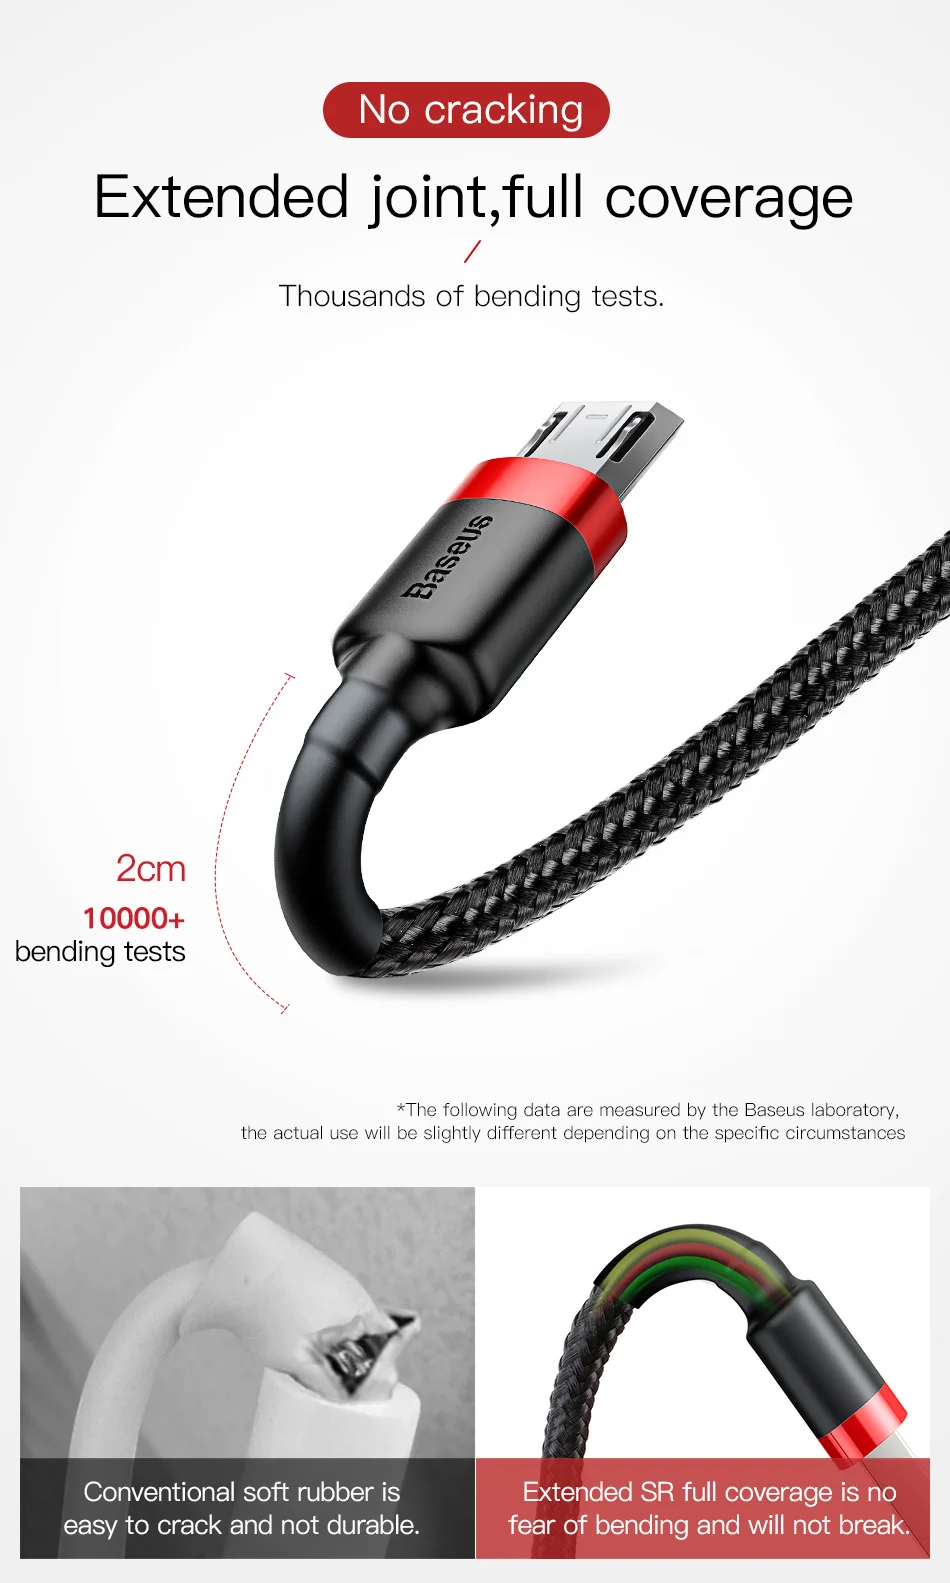 SR Protection Micro USB Cable Charger